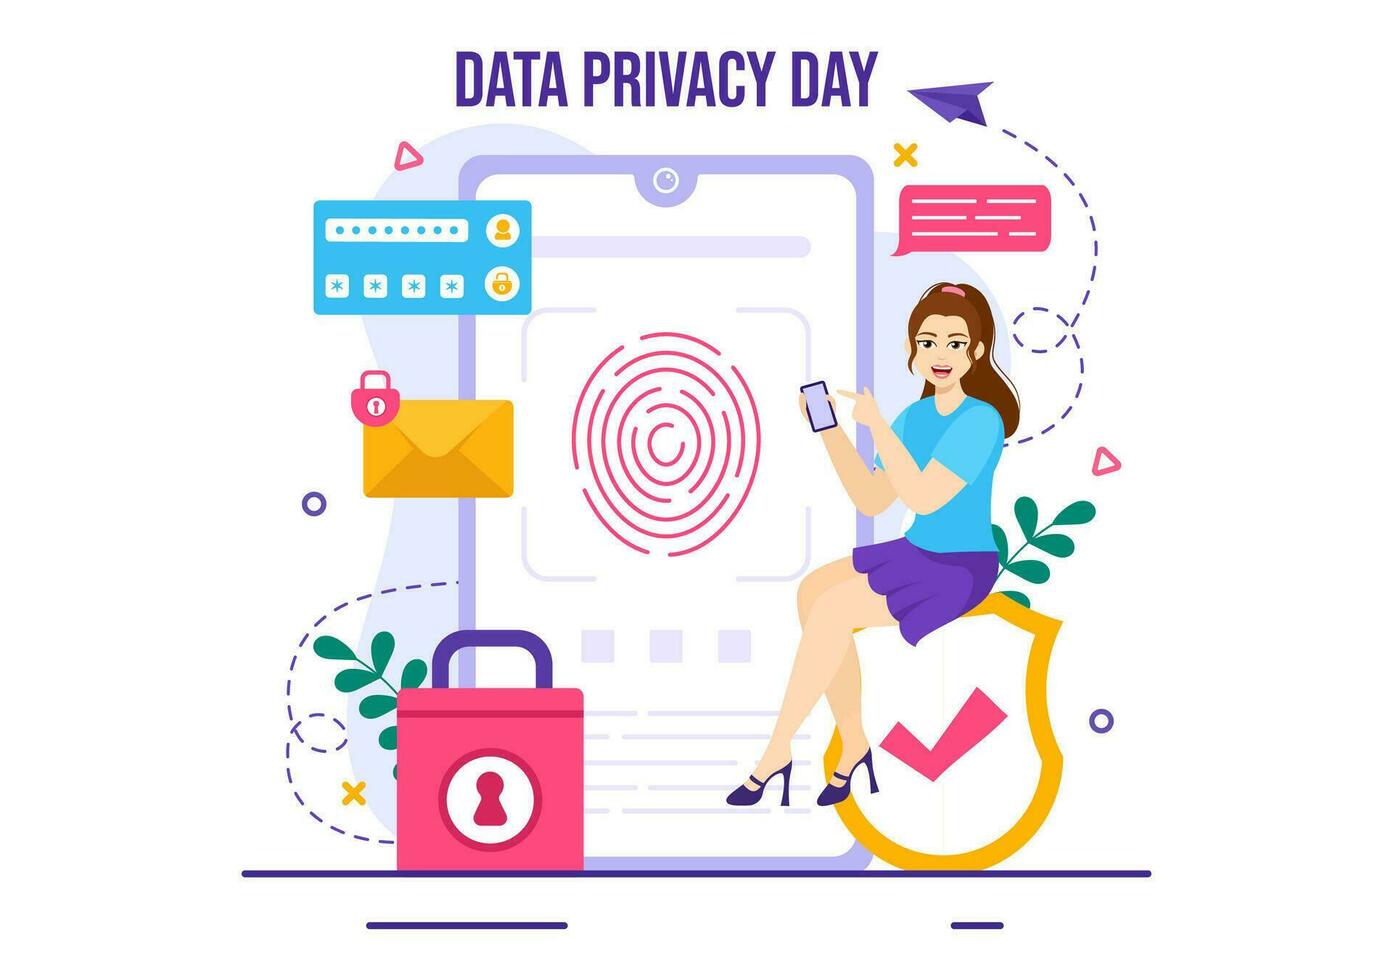 Data Privacy Day Vector Illustration on January 28 with Lock on the Screen for Shield Information Document in Flat Cartoon Background Design